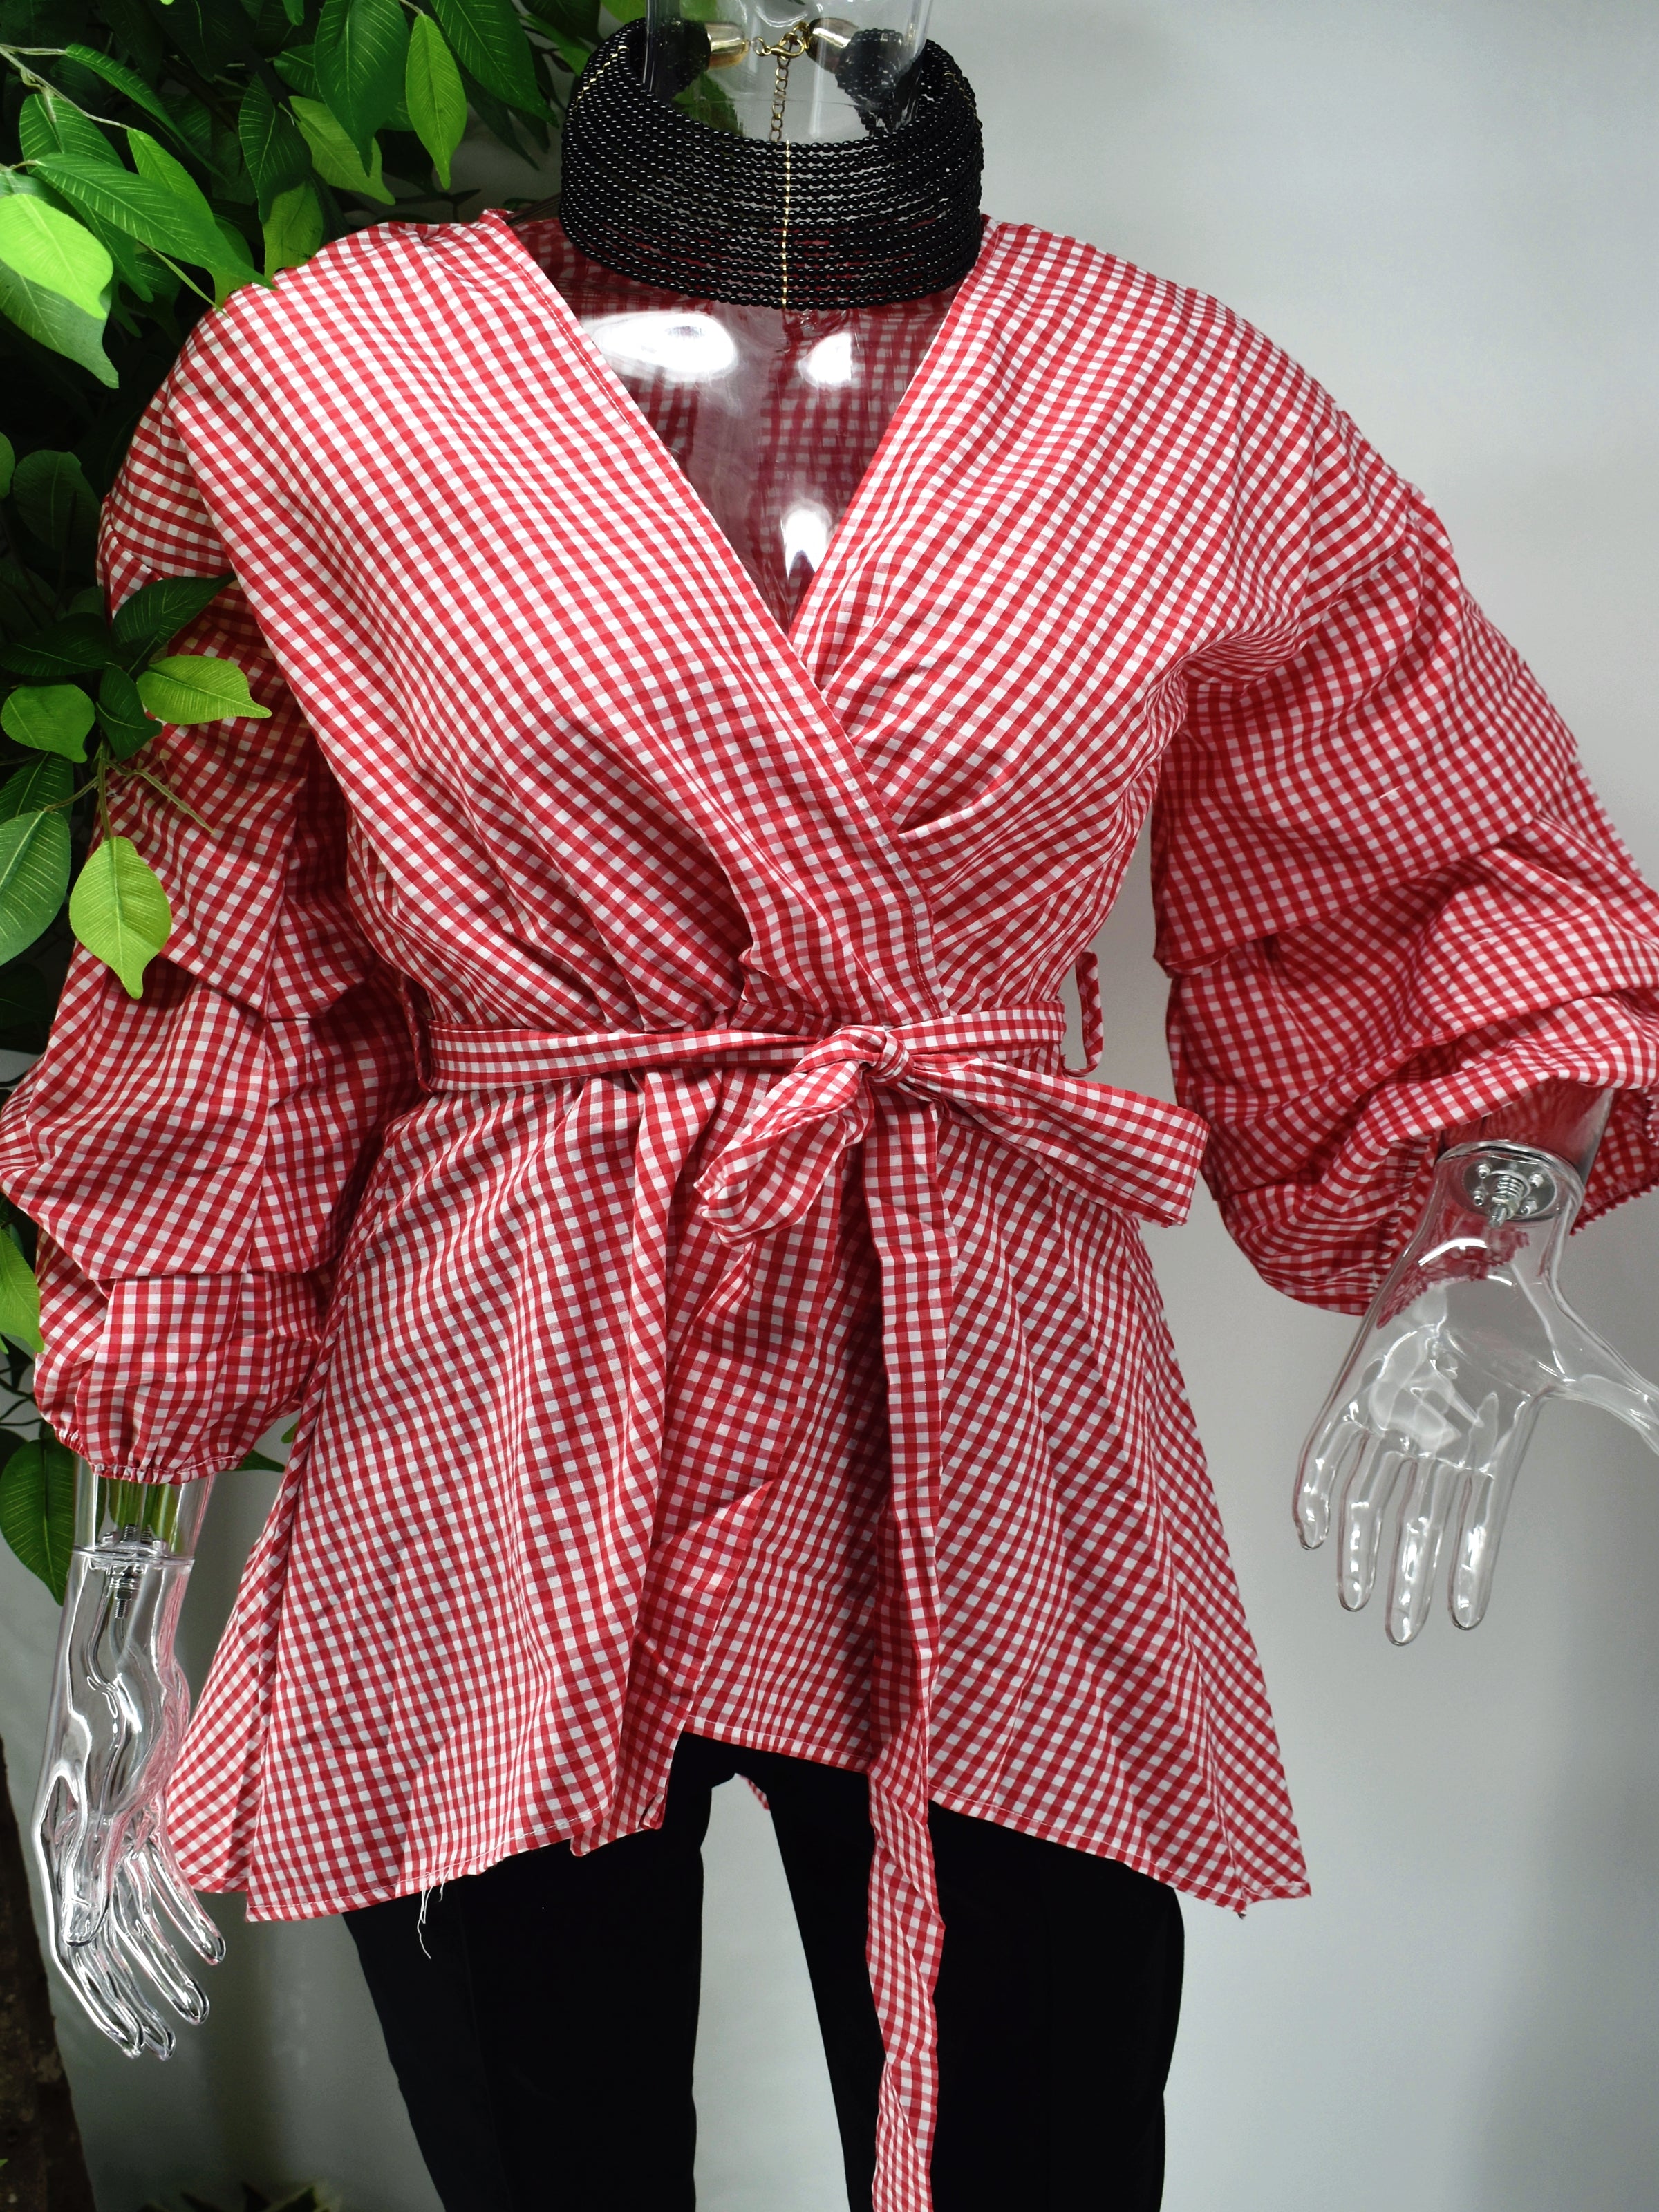 A classic print meets a modern design with our Birdina red and white gingham print top. Our Birdina is full of style and pizzaz. It has a v-neckline, ruffled puffed sleeve and an uneven hem. The design is completed with a tied cinched waist.